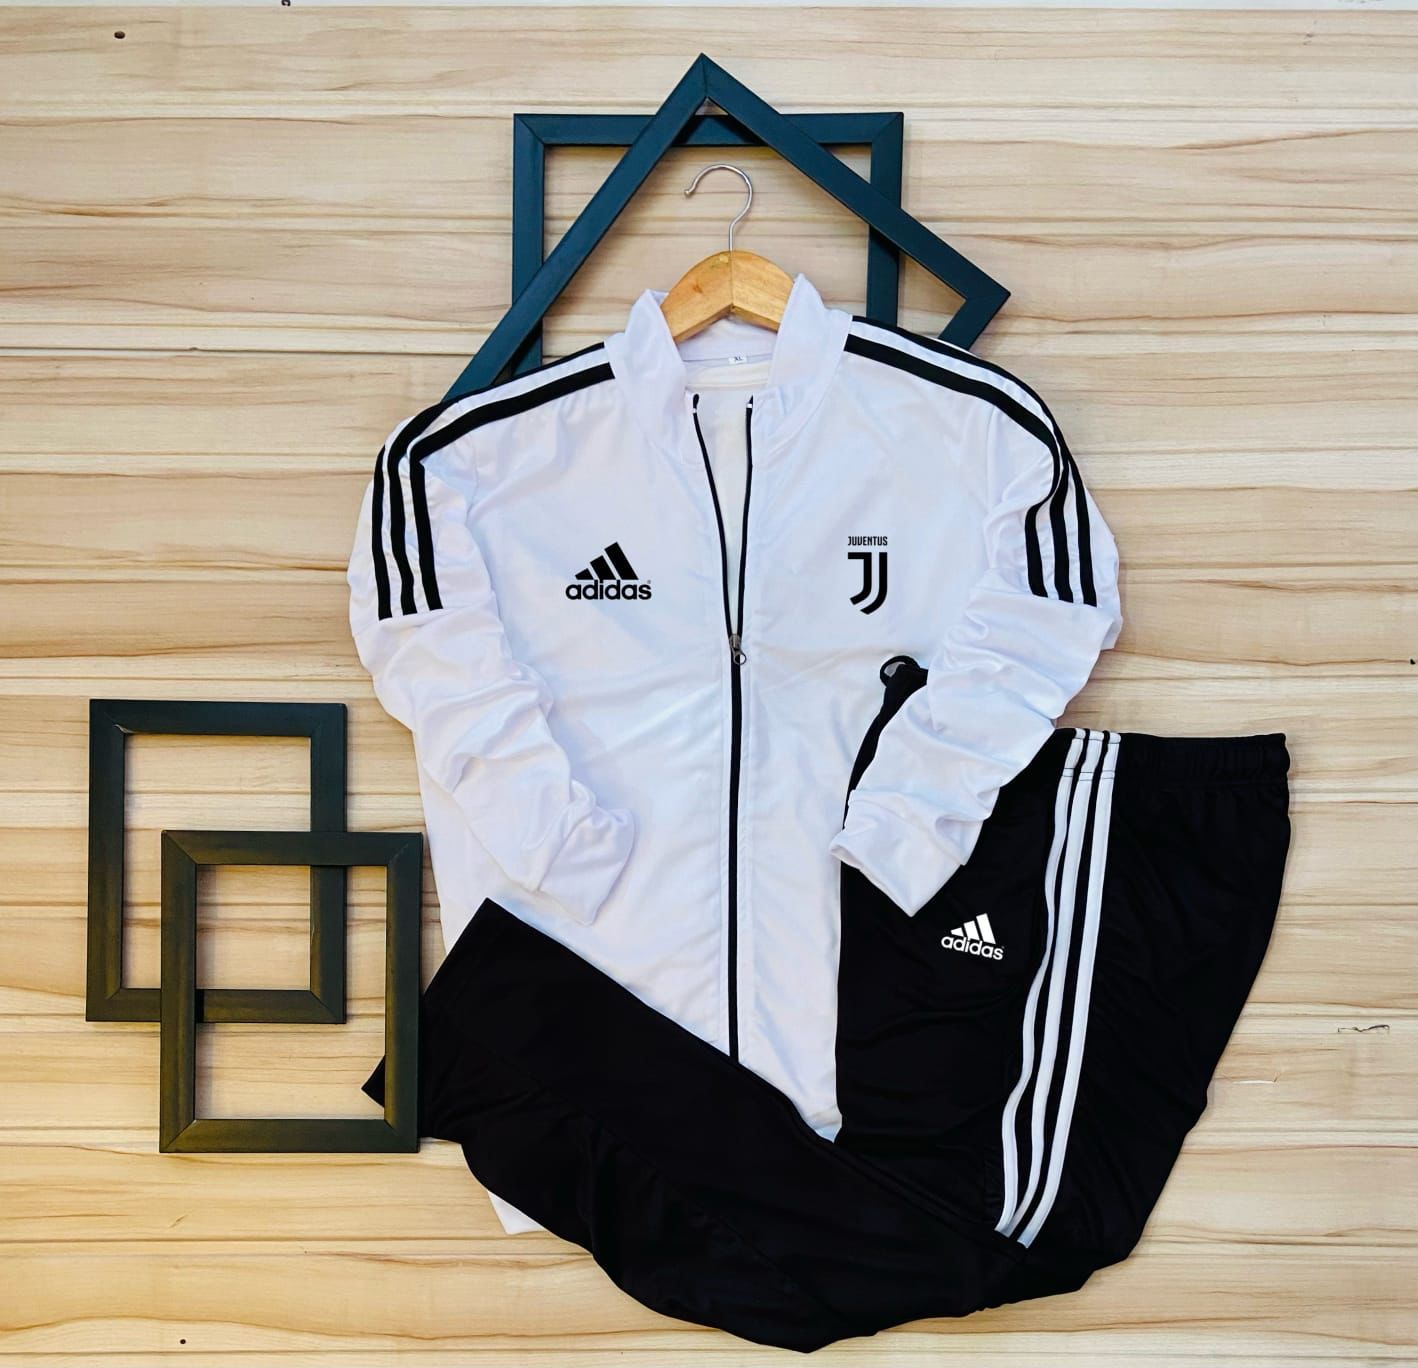 Details View - Adidas Tracksuit photos - reseller,reseller marketplace,advetising your products,reseller bazzar,resellerbazzar.in,india's classified site,Adidas Tracksuit , Adidas Tracksuit in Gujarat , Buy Adidas Tracksuit online,Adidas Tracksuit in vadodara, Adidas Tracksuit Ahmedabad 